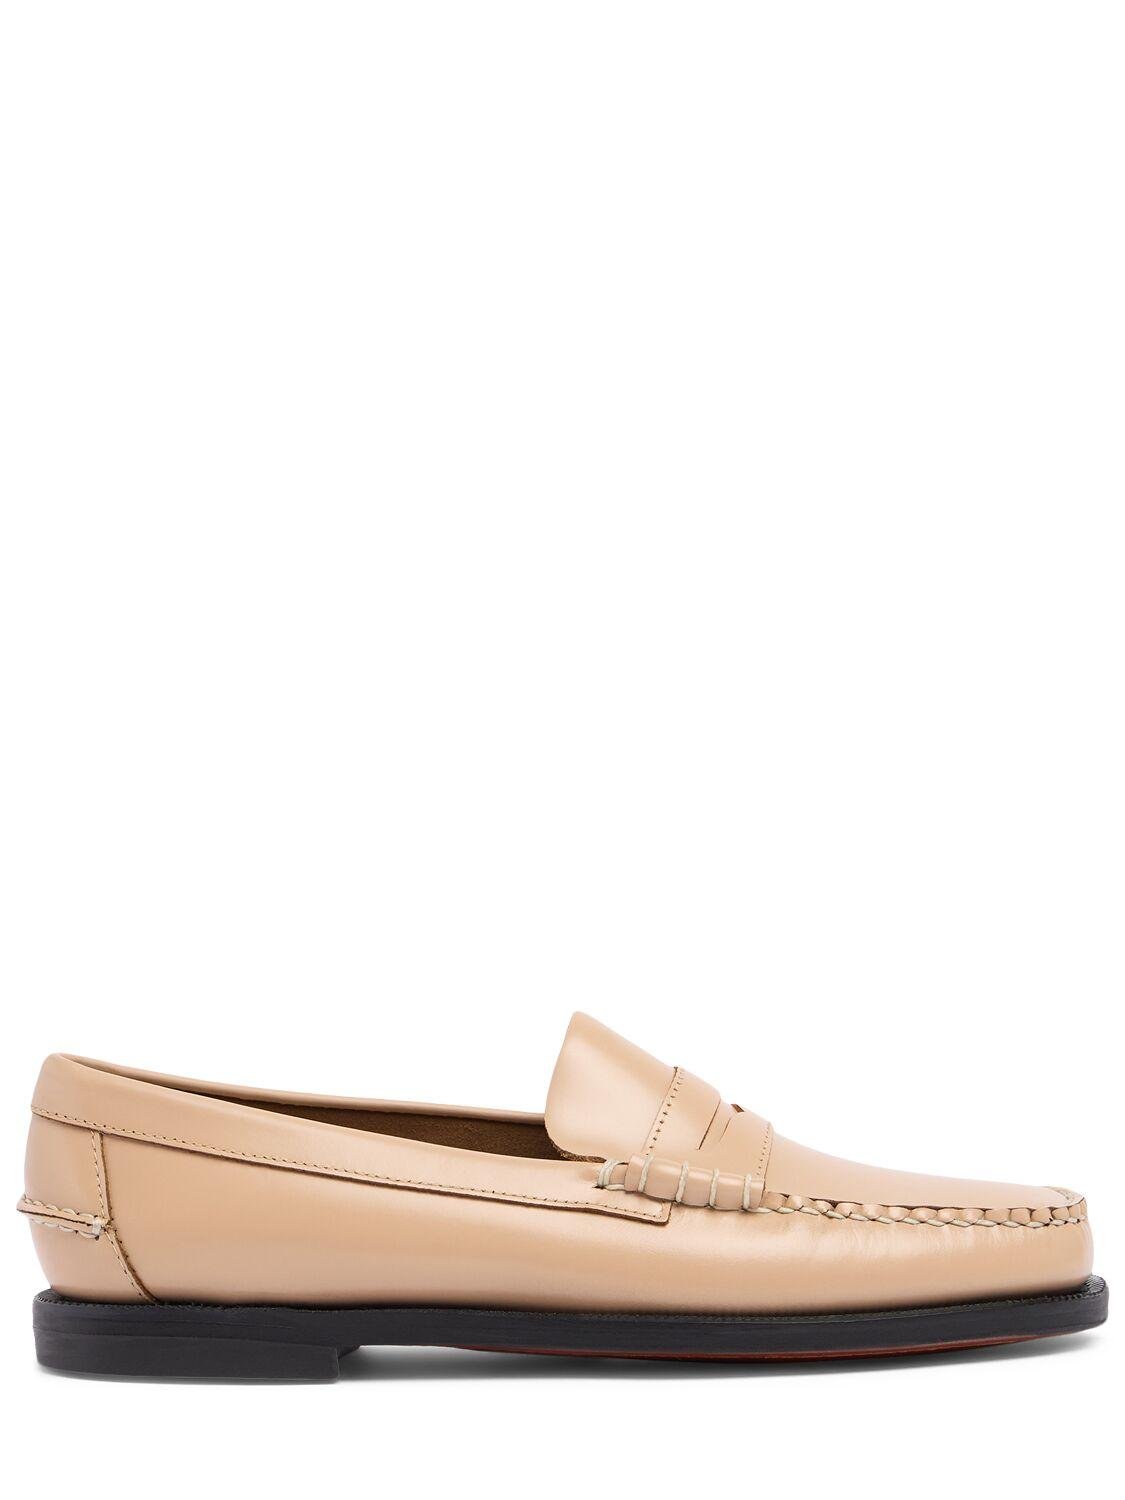 Classic Dan Pigment Leather Loafers by SEBAGO